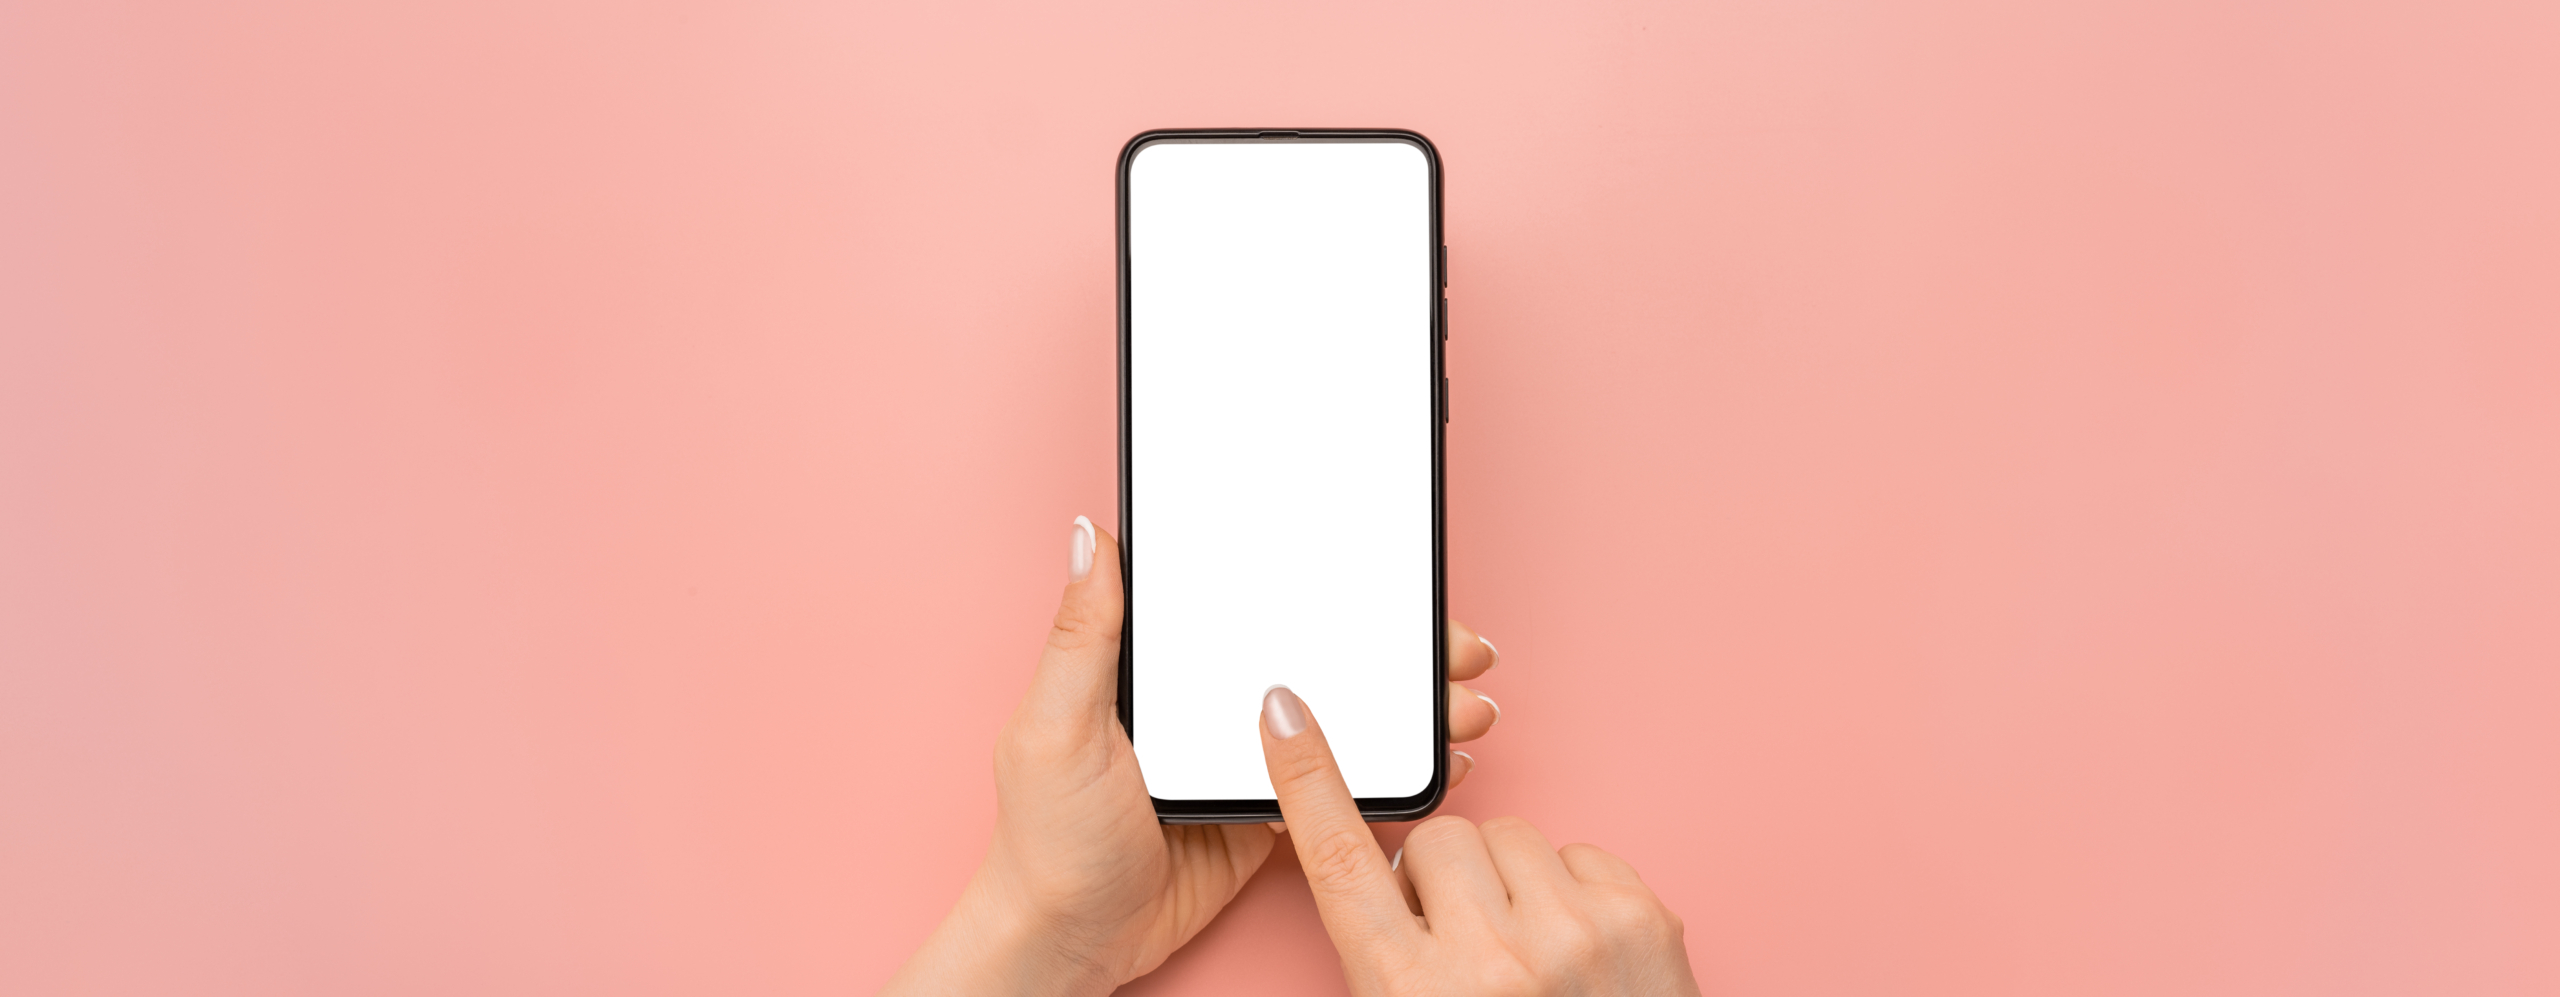 Hand holding cellphone device and touching screen on pink background. Isolated hands and smartphone on pink background. Female hand holding modern black cell phone in vertical position